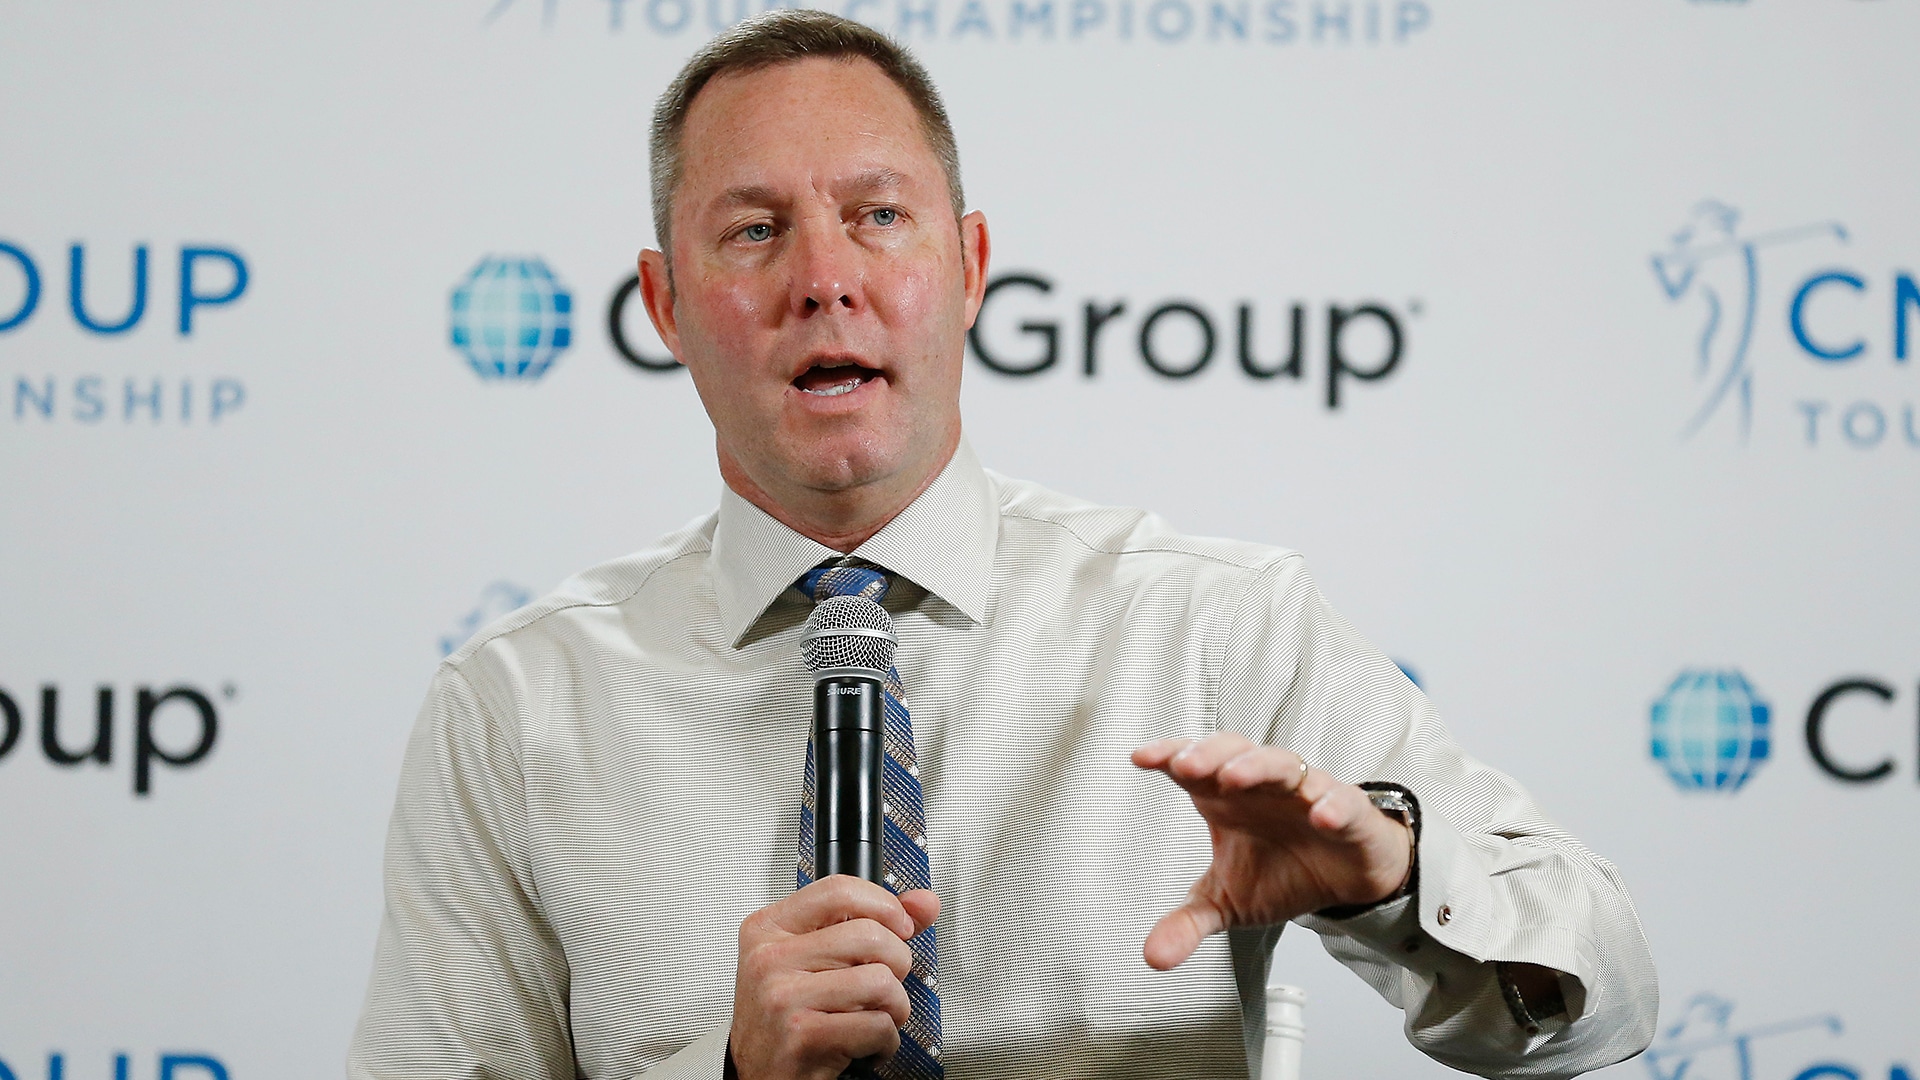 LPGA commissioner Mike Whan to step down this year